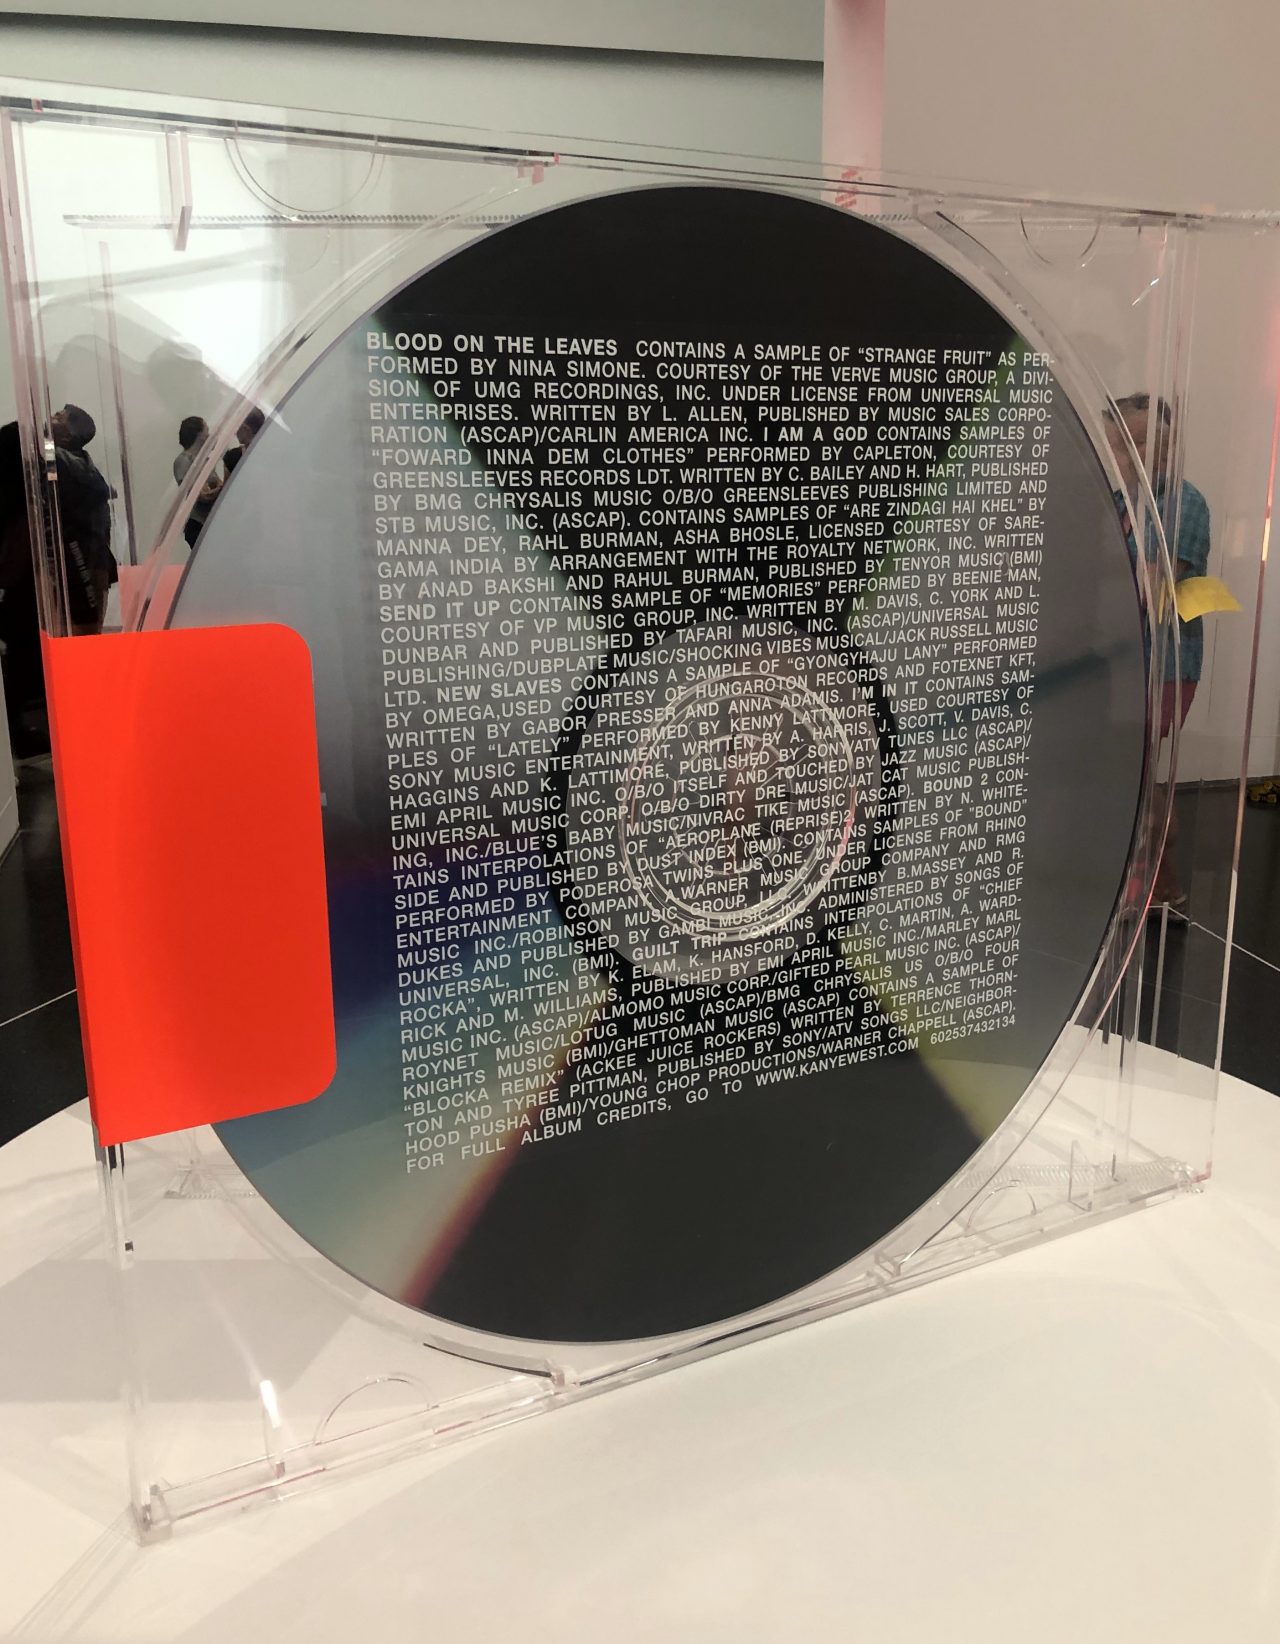 Large Yeezus Sculpture in front of Chief Keef-Supreme Art in the Virgil  Abloh “Figures of Speech” exhibit in Chicago : r/Kanye